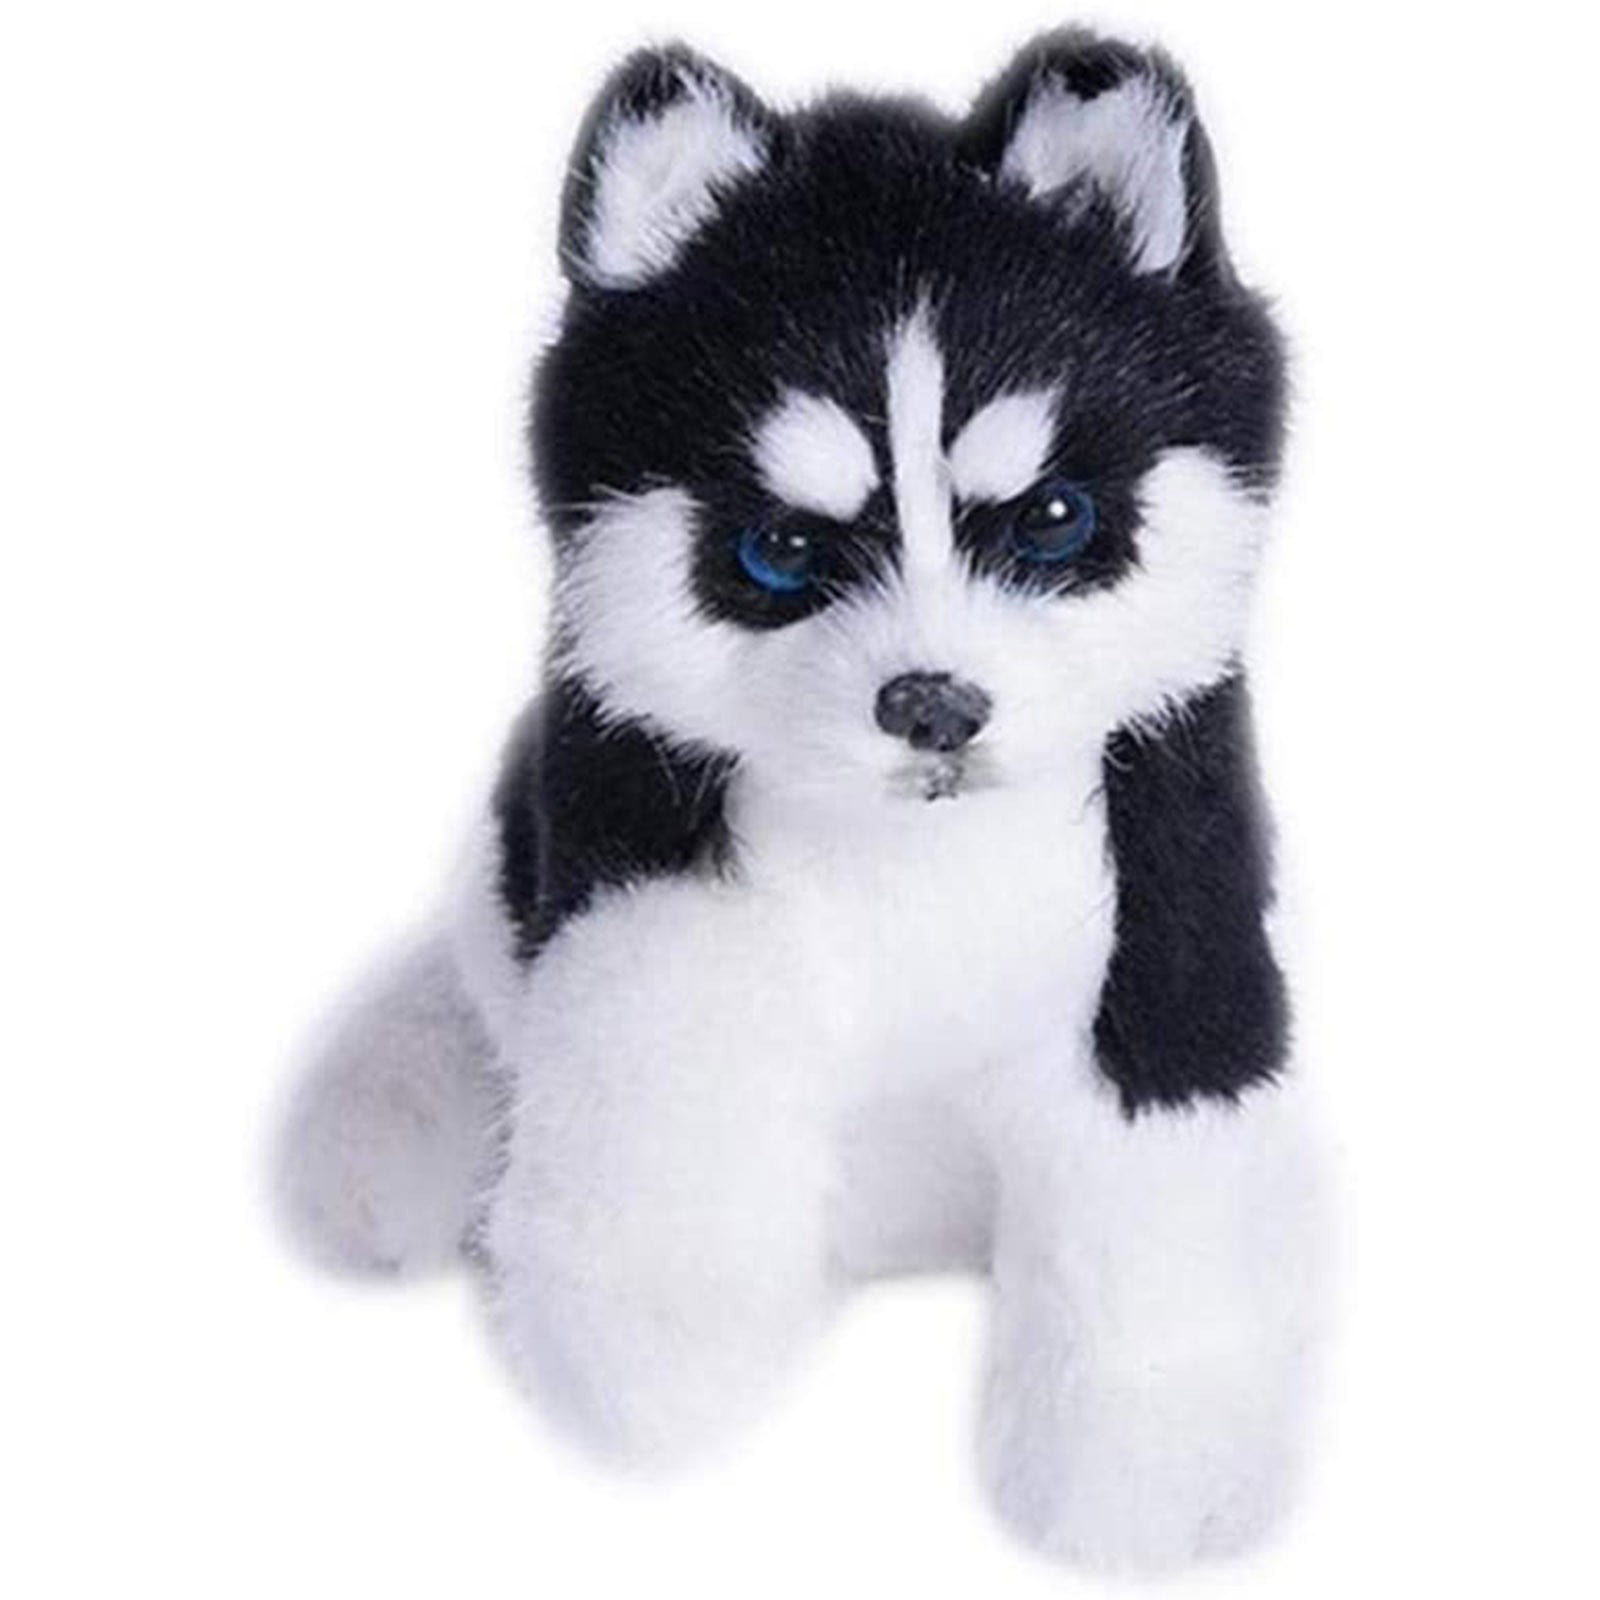 Simulation Science & Nature Animal Dog Model Figurine Kids Toy Gifts 